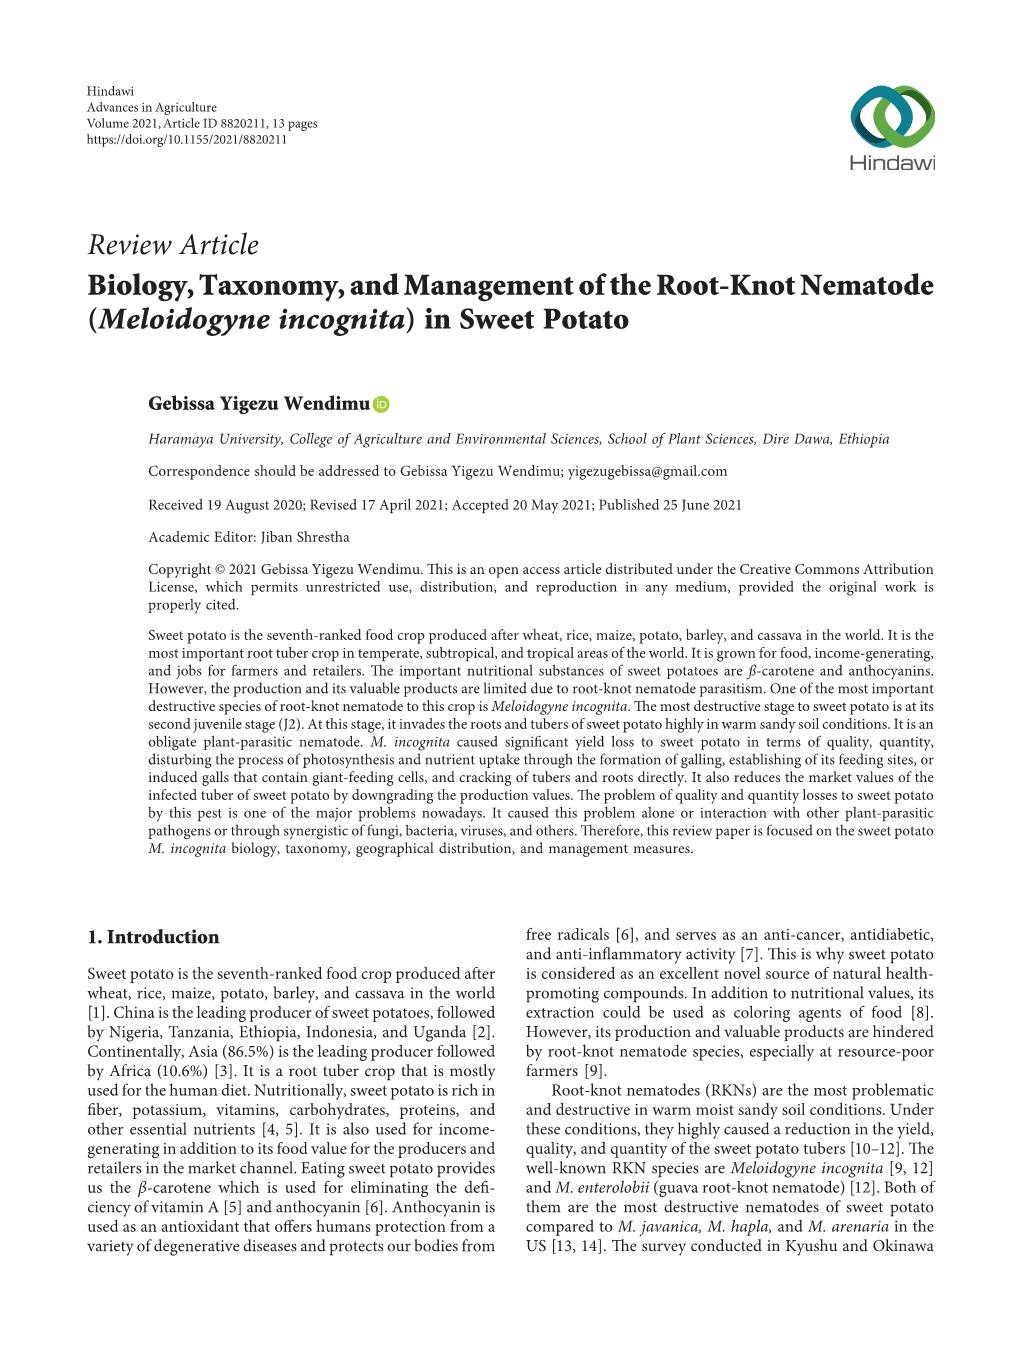 Biology, Taxonomy, and Management of the Root-Knot Nematode (Meloidogyne Incognita) in Sweet Potato